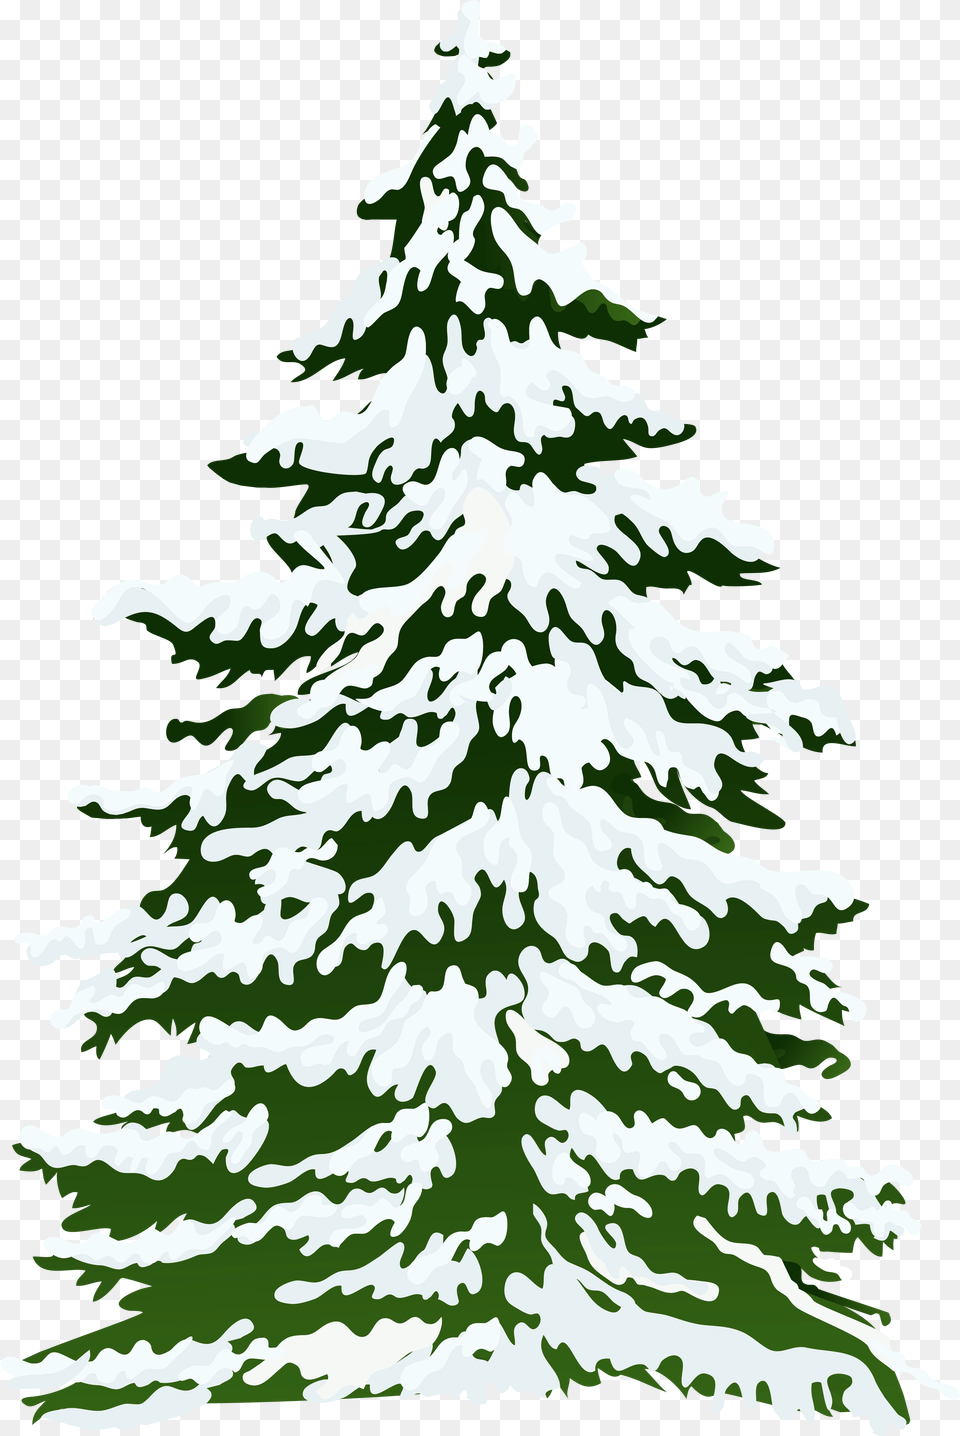 Download Pine Tree Freeuse Stock Outline Rr Snowy Pine Tree Watercolor, Fir, Plant, Christmas, Christmas Decorations Png